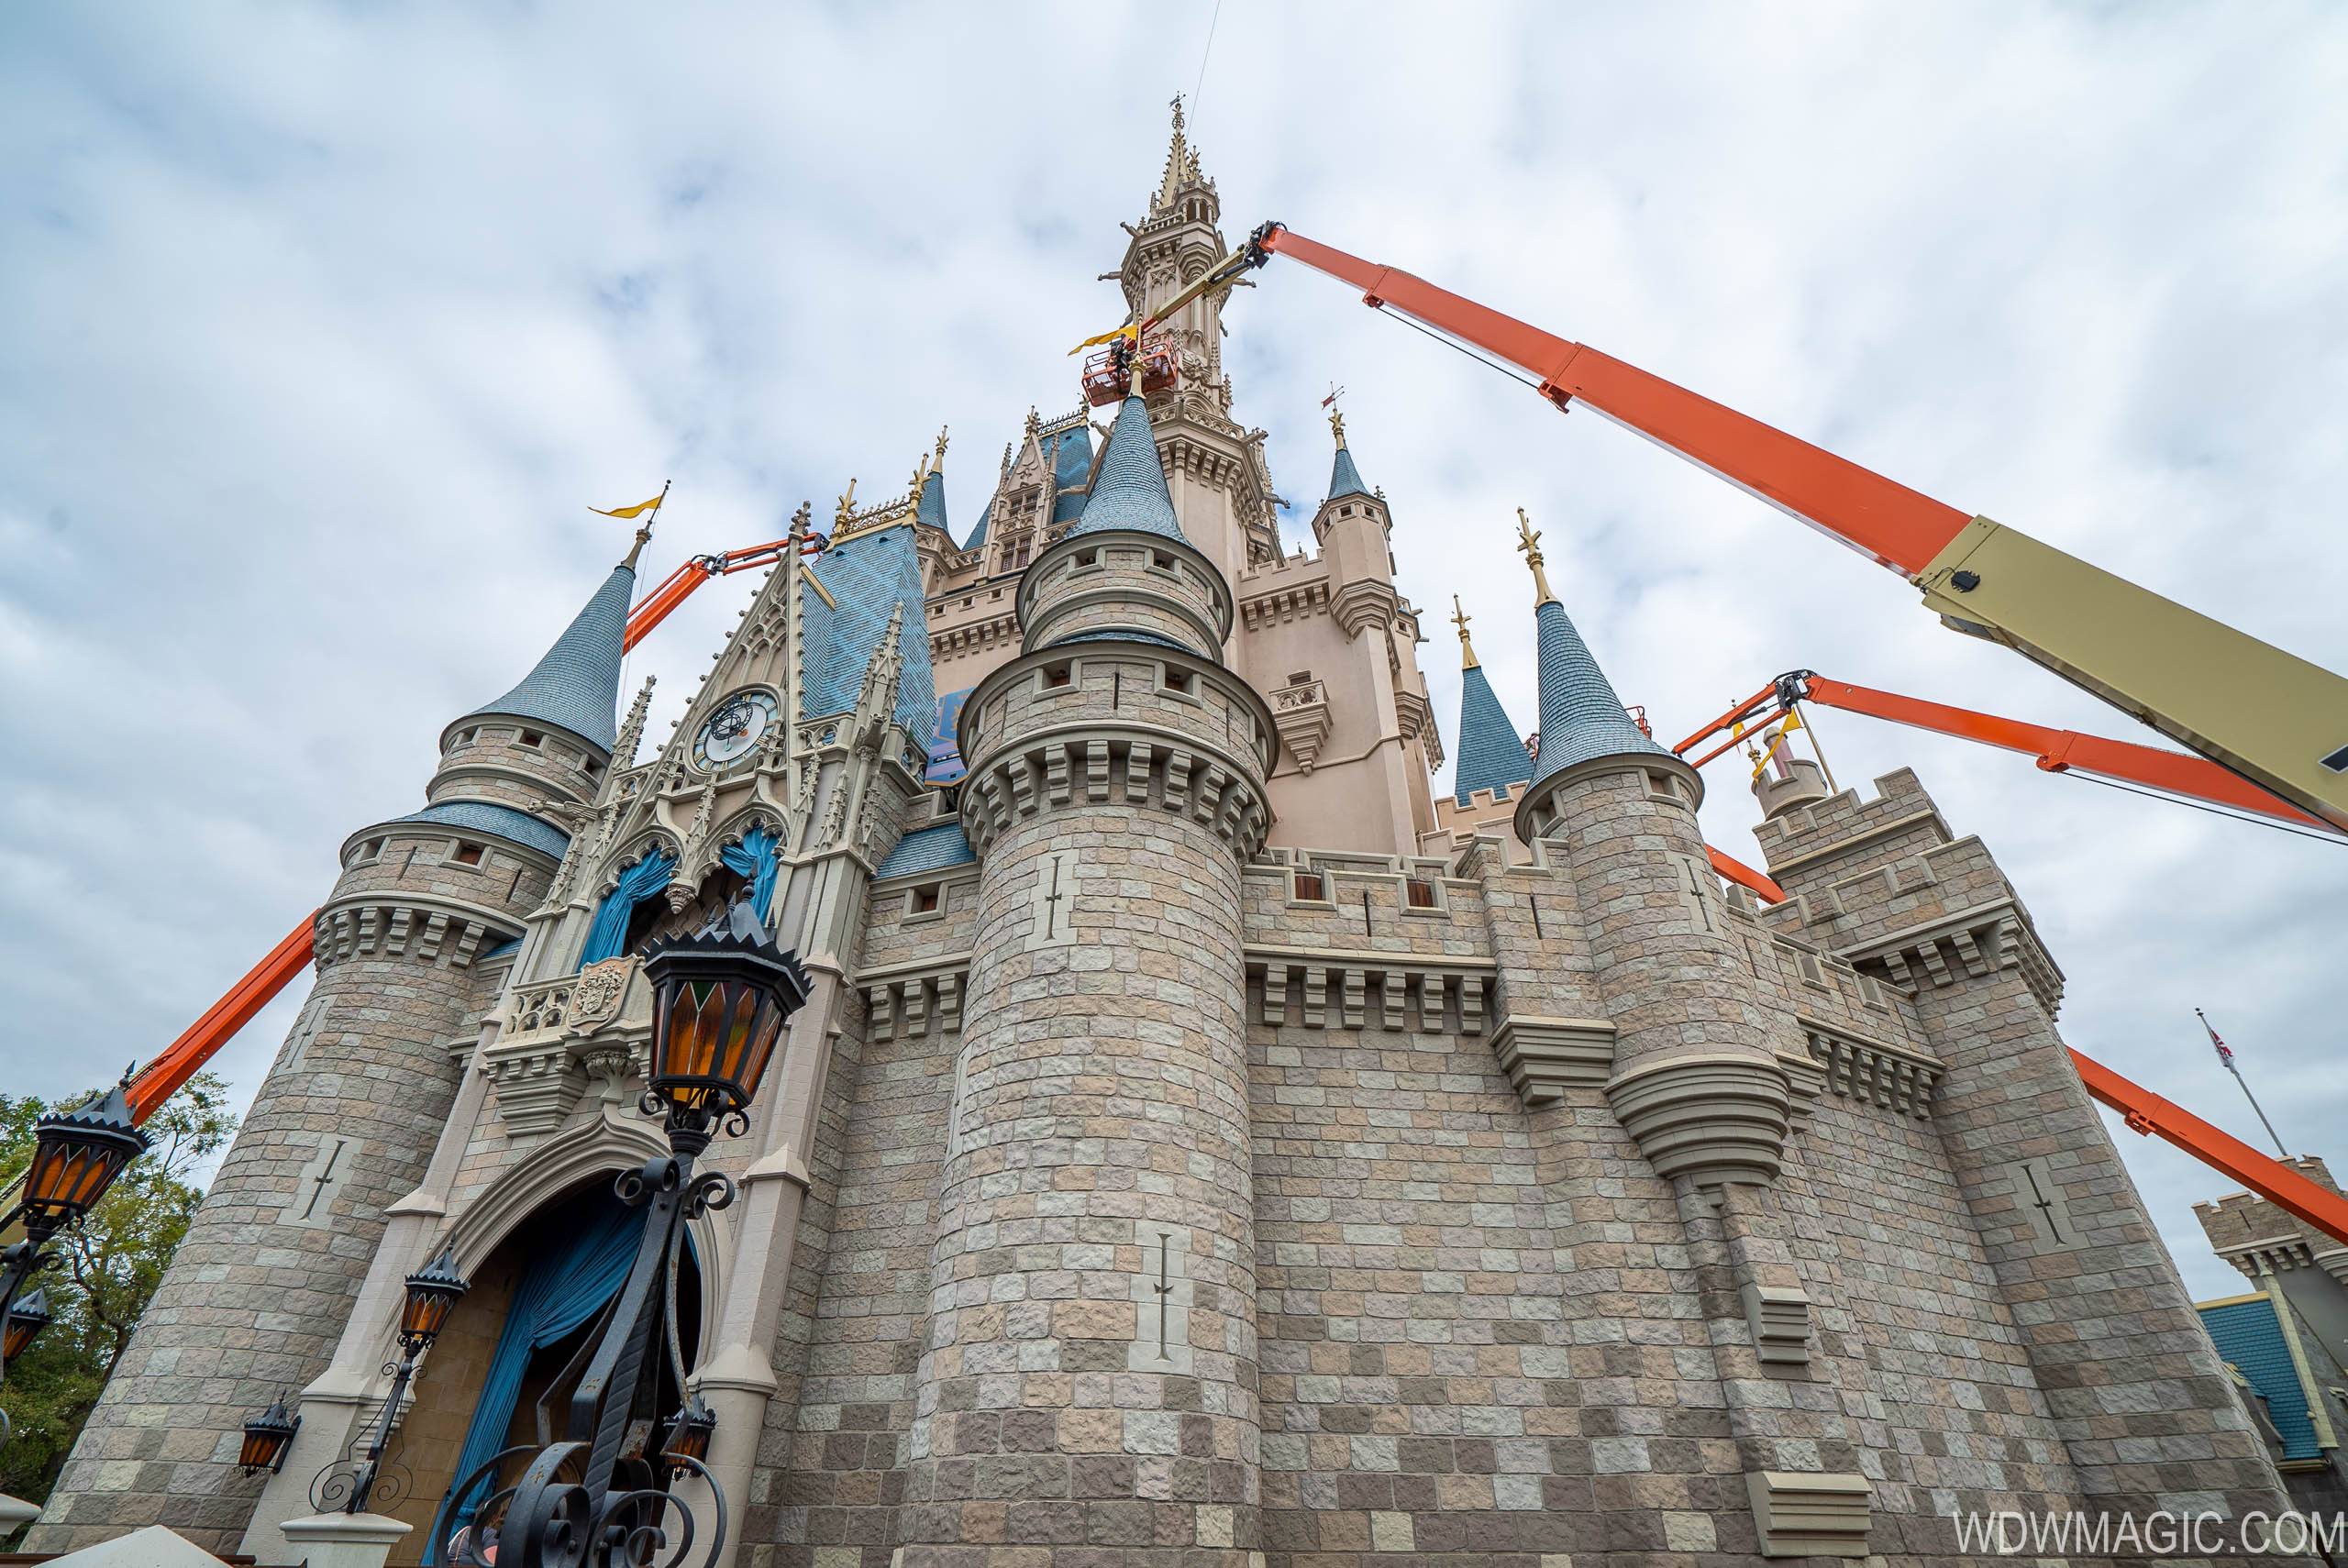 PHOTOS - High reach cranes up at Cinderella Castle as painting gets underway